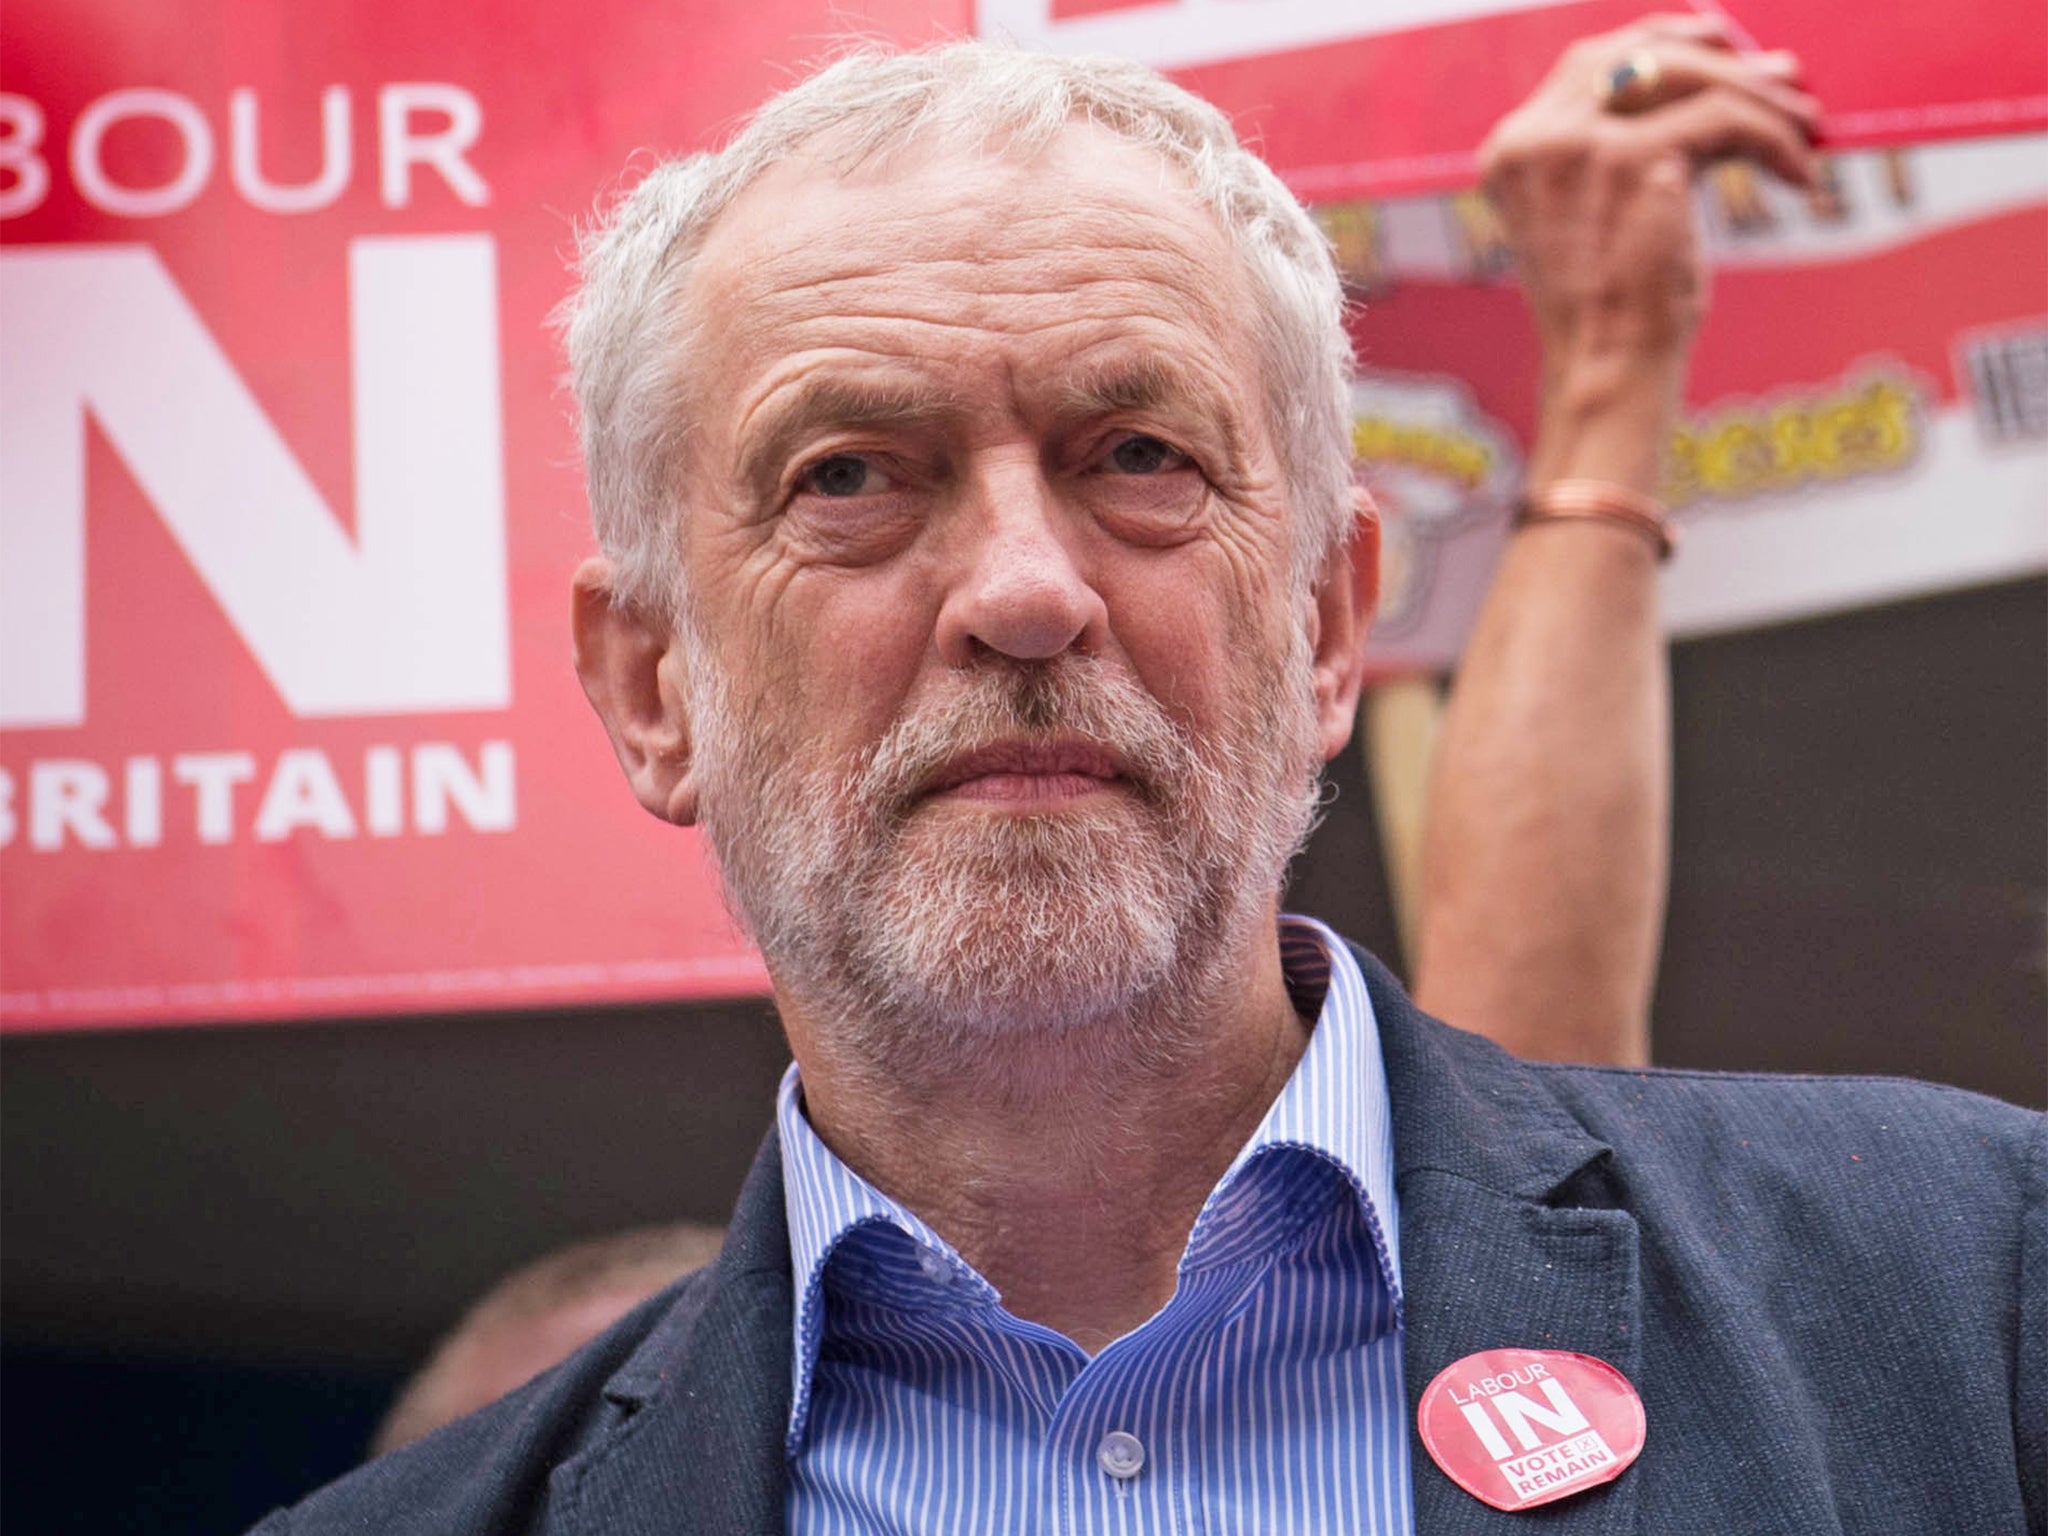 The Labour leader's speech will focus on working conditions